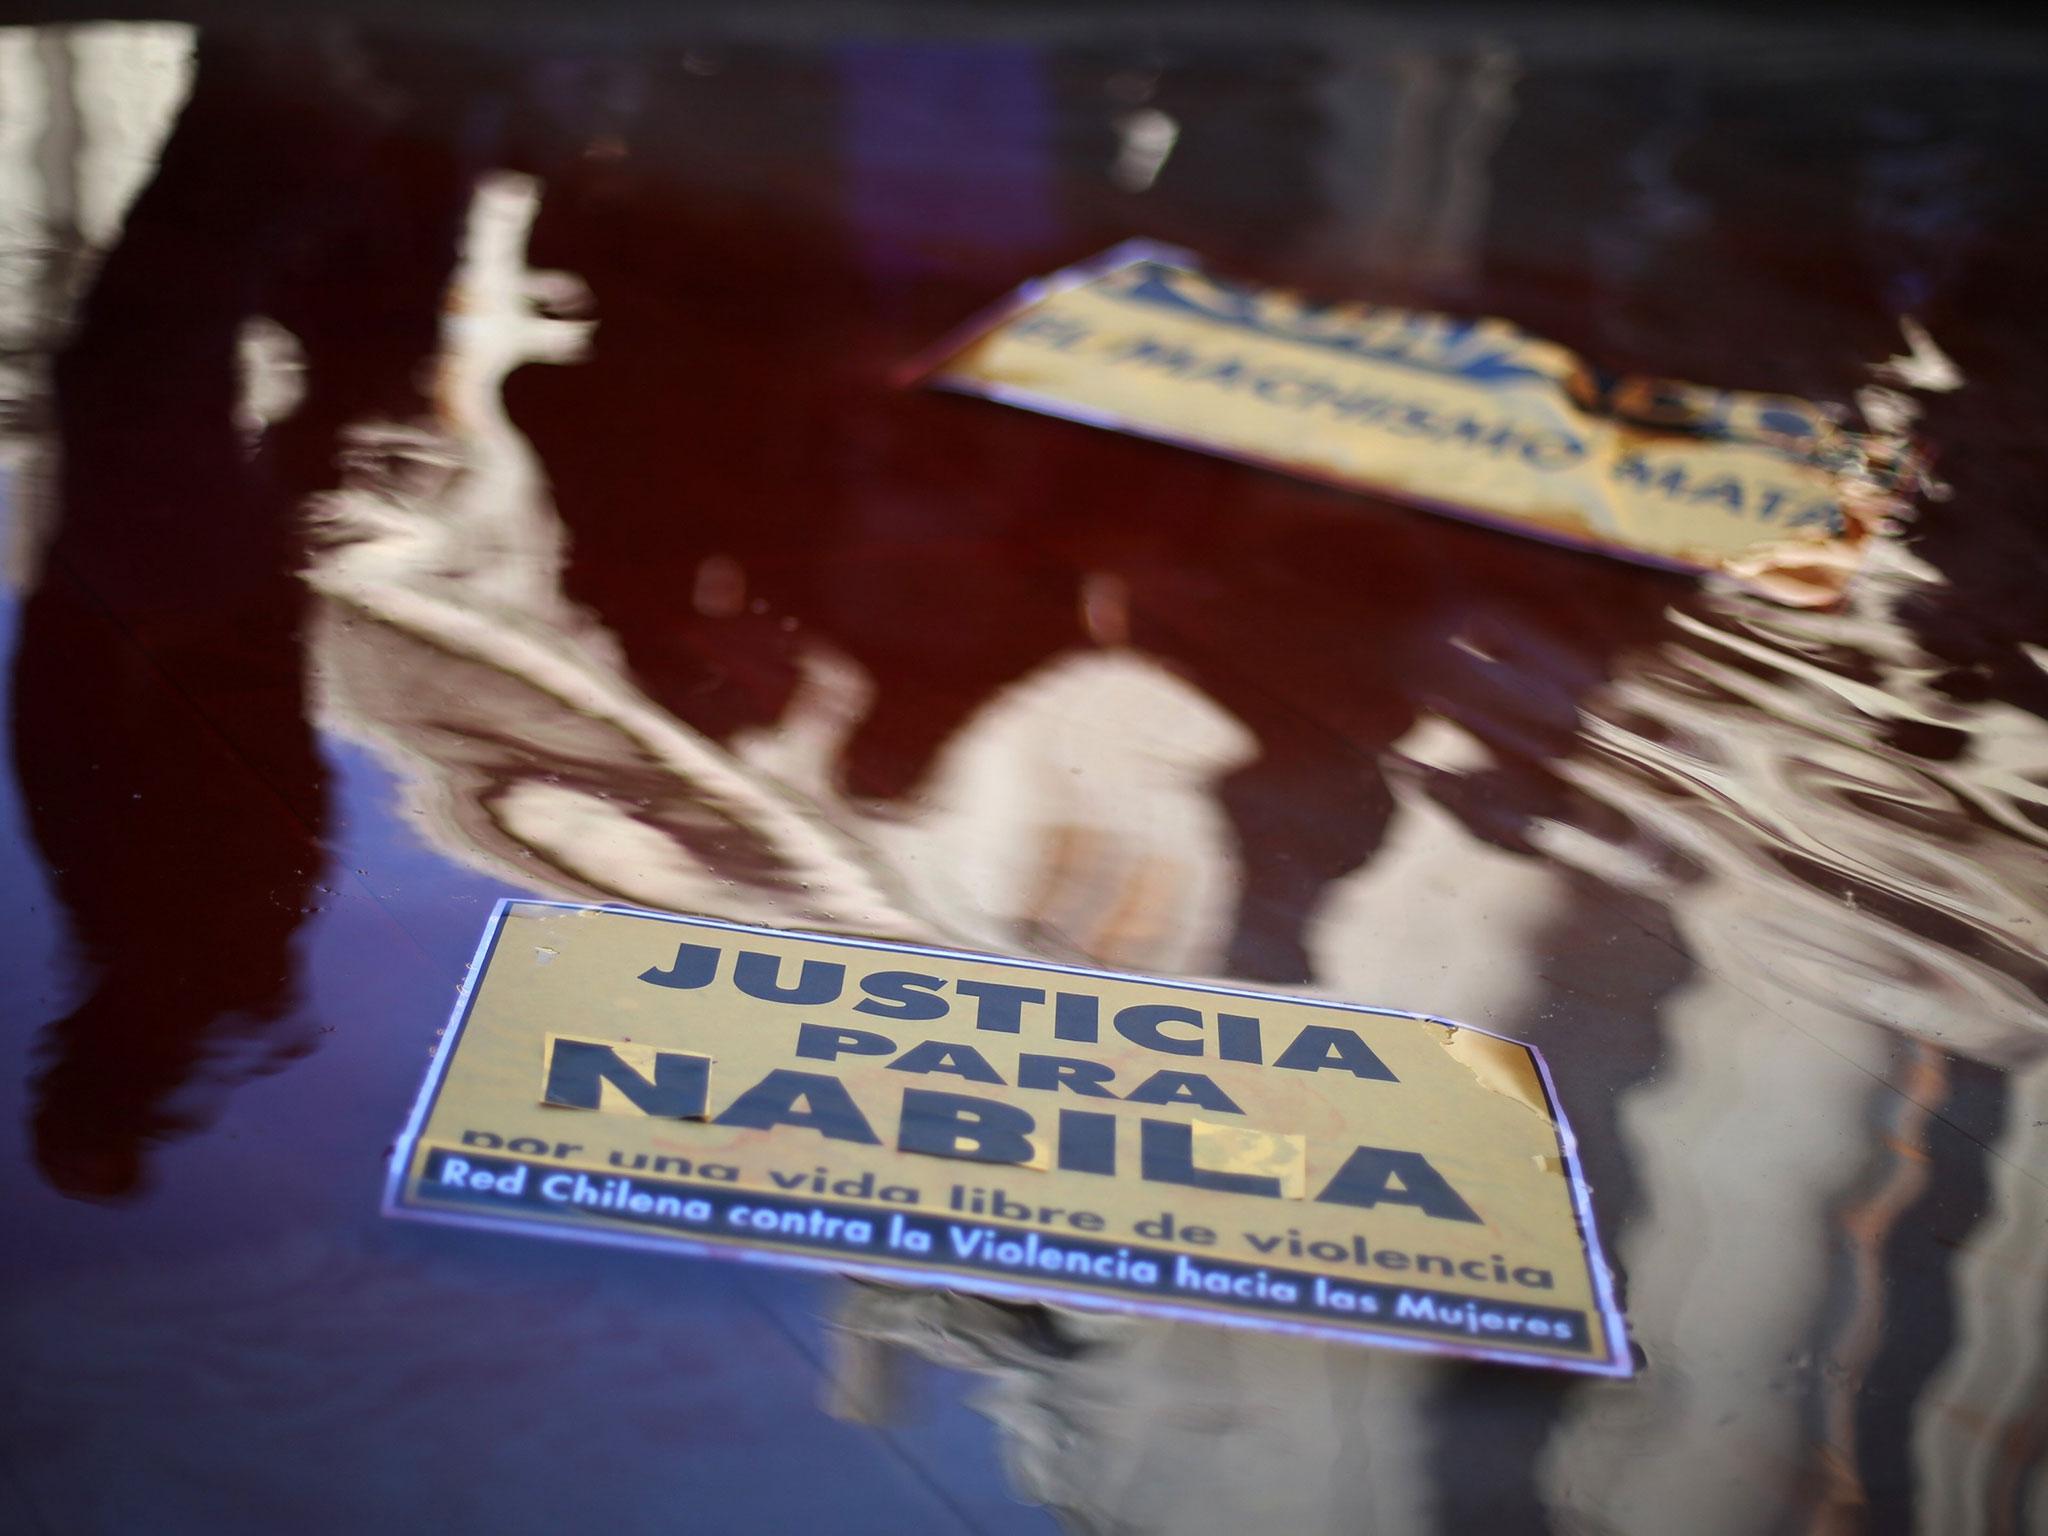 Signs reading 'Justice for Nabila, for a life free from violence' were brandished as women protested the reduction of Mauricio Ortega's sentence